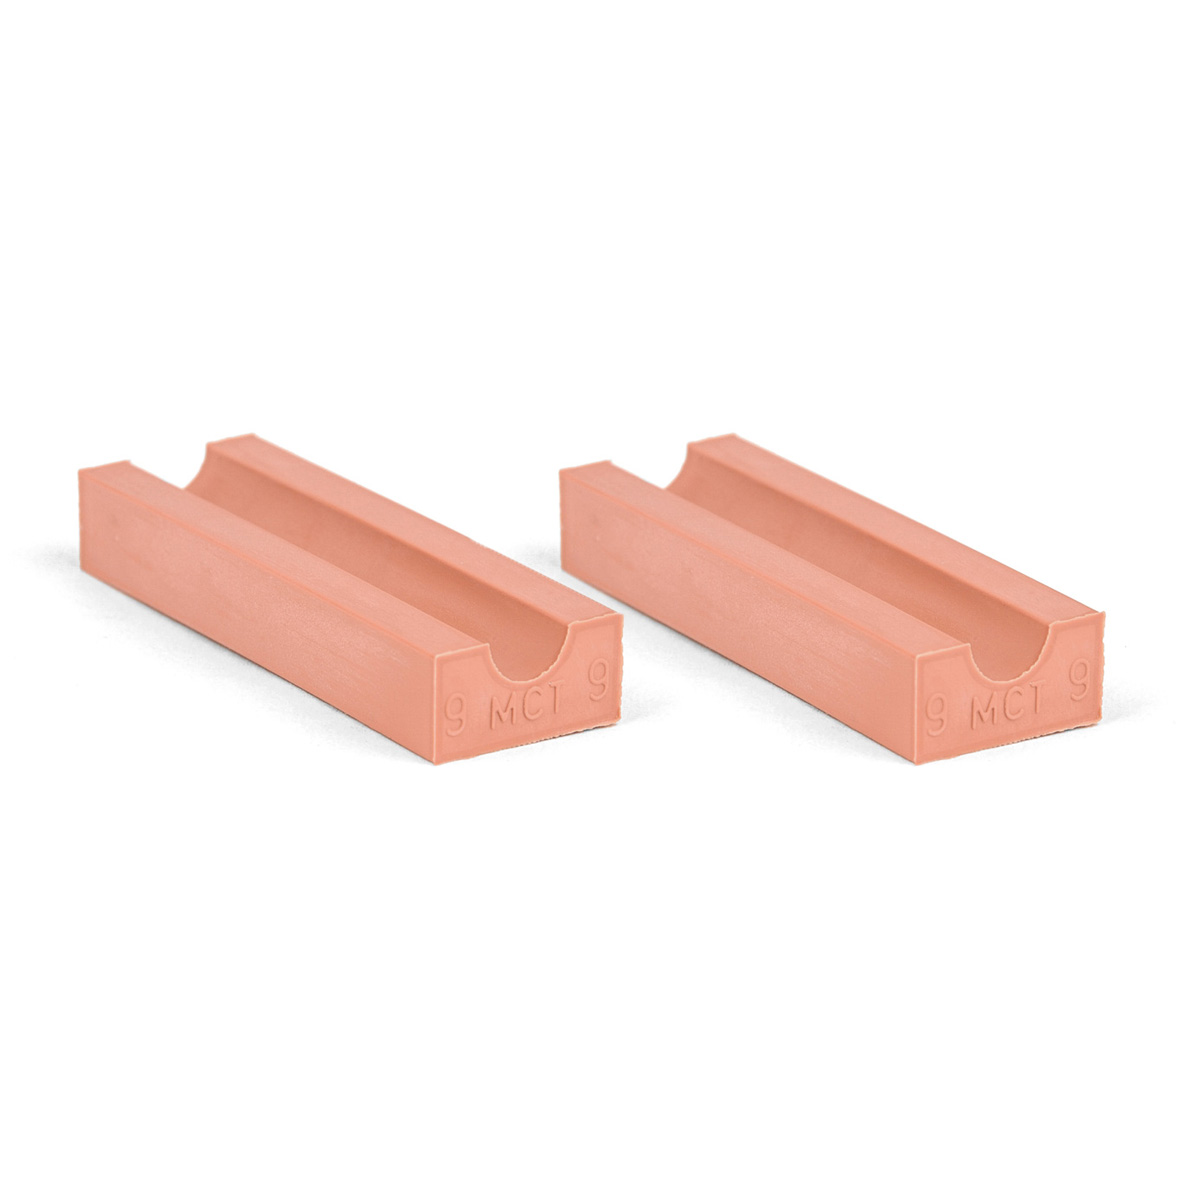 20-09*2 Set of 2 half insert block lycron 30mm, 20-09 for cable/pipe diam. 8.5-9.5mm